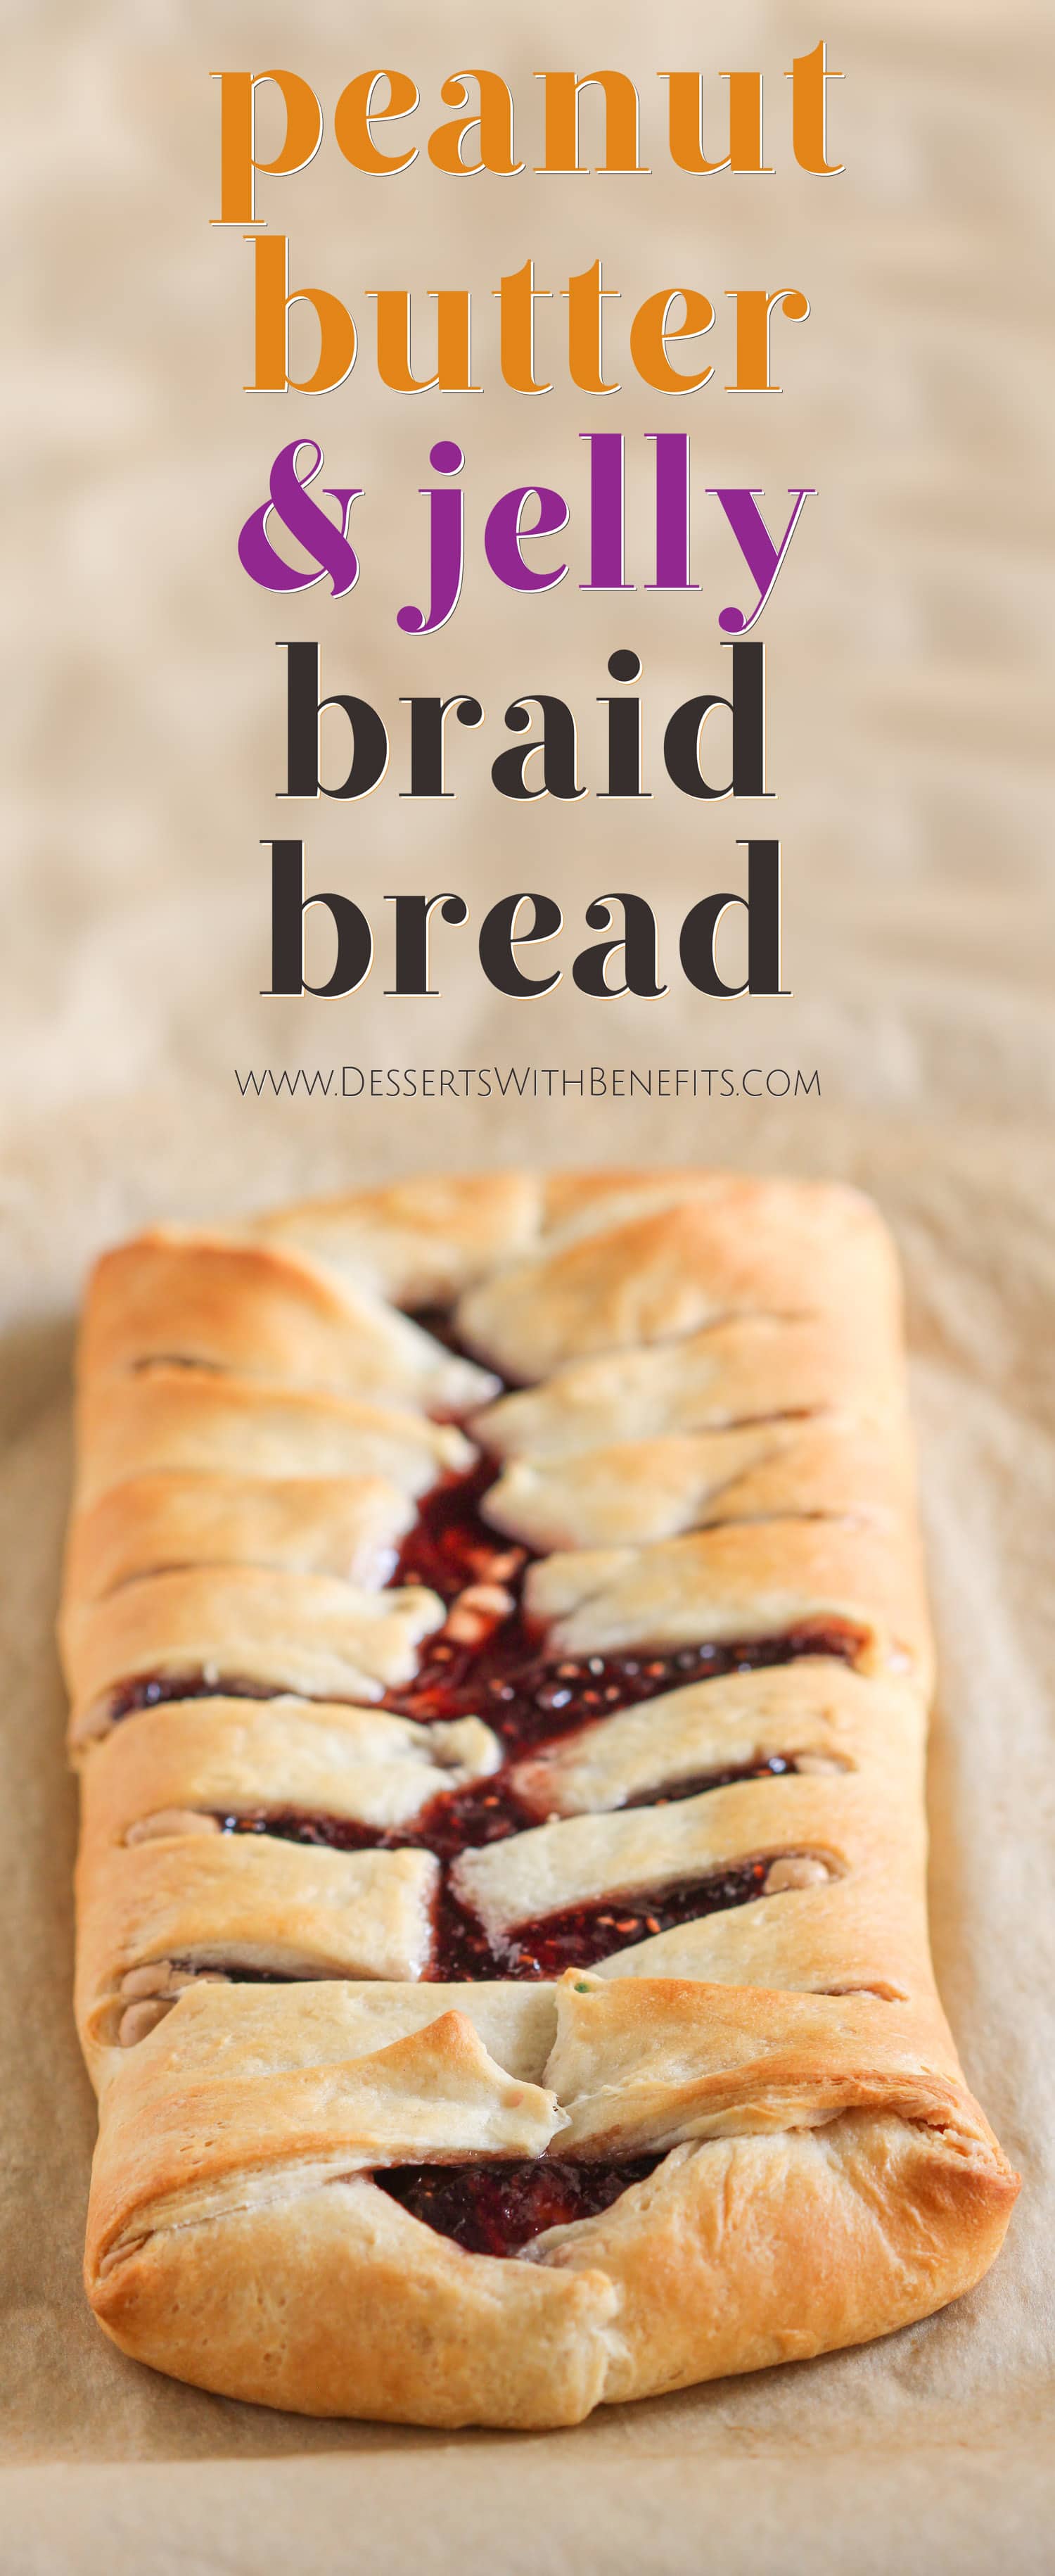 Step up your PB&J game with this easy Peanut Butter and Jelly Braid Bread! It looks difficult to make but took less than 20 minutes to whip together. Oh, and it’s vegan, all natural, and has no sugar added – perfect as a tasty, back to school lunchbox snack! Healthy Dessert Recipes with sugar free, low calorie, low fat, low carb, high protein, gluten free, dairy free, vegan, and raw options at the Desserts With Benefits Blog.